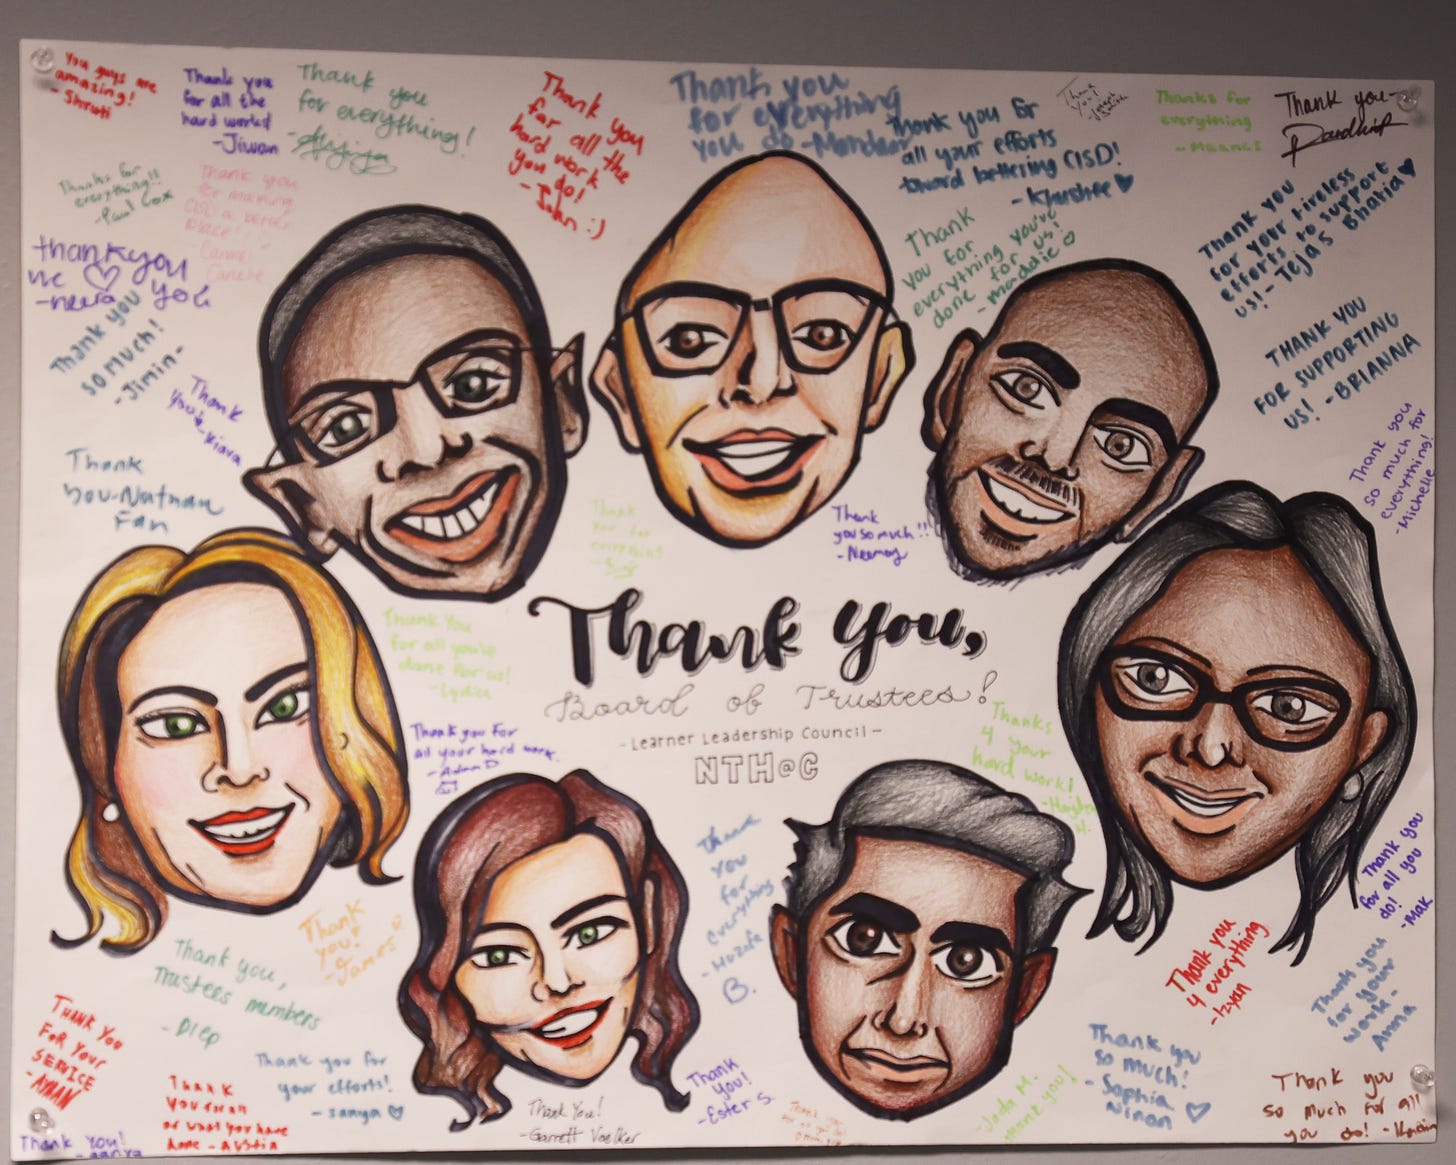 Caricatures of the seven Coppell ISD trustees surrounded by thank you messages from New Tech High students